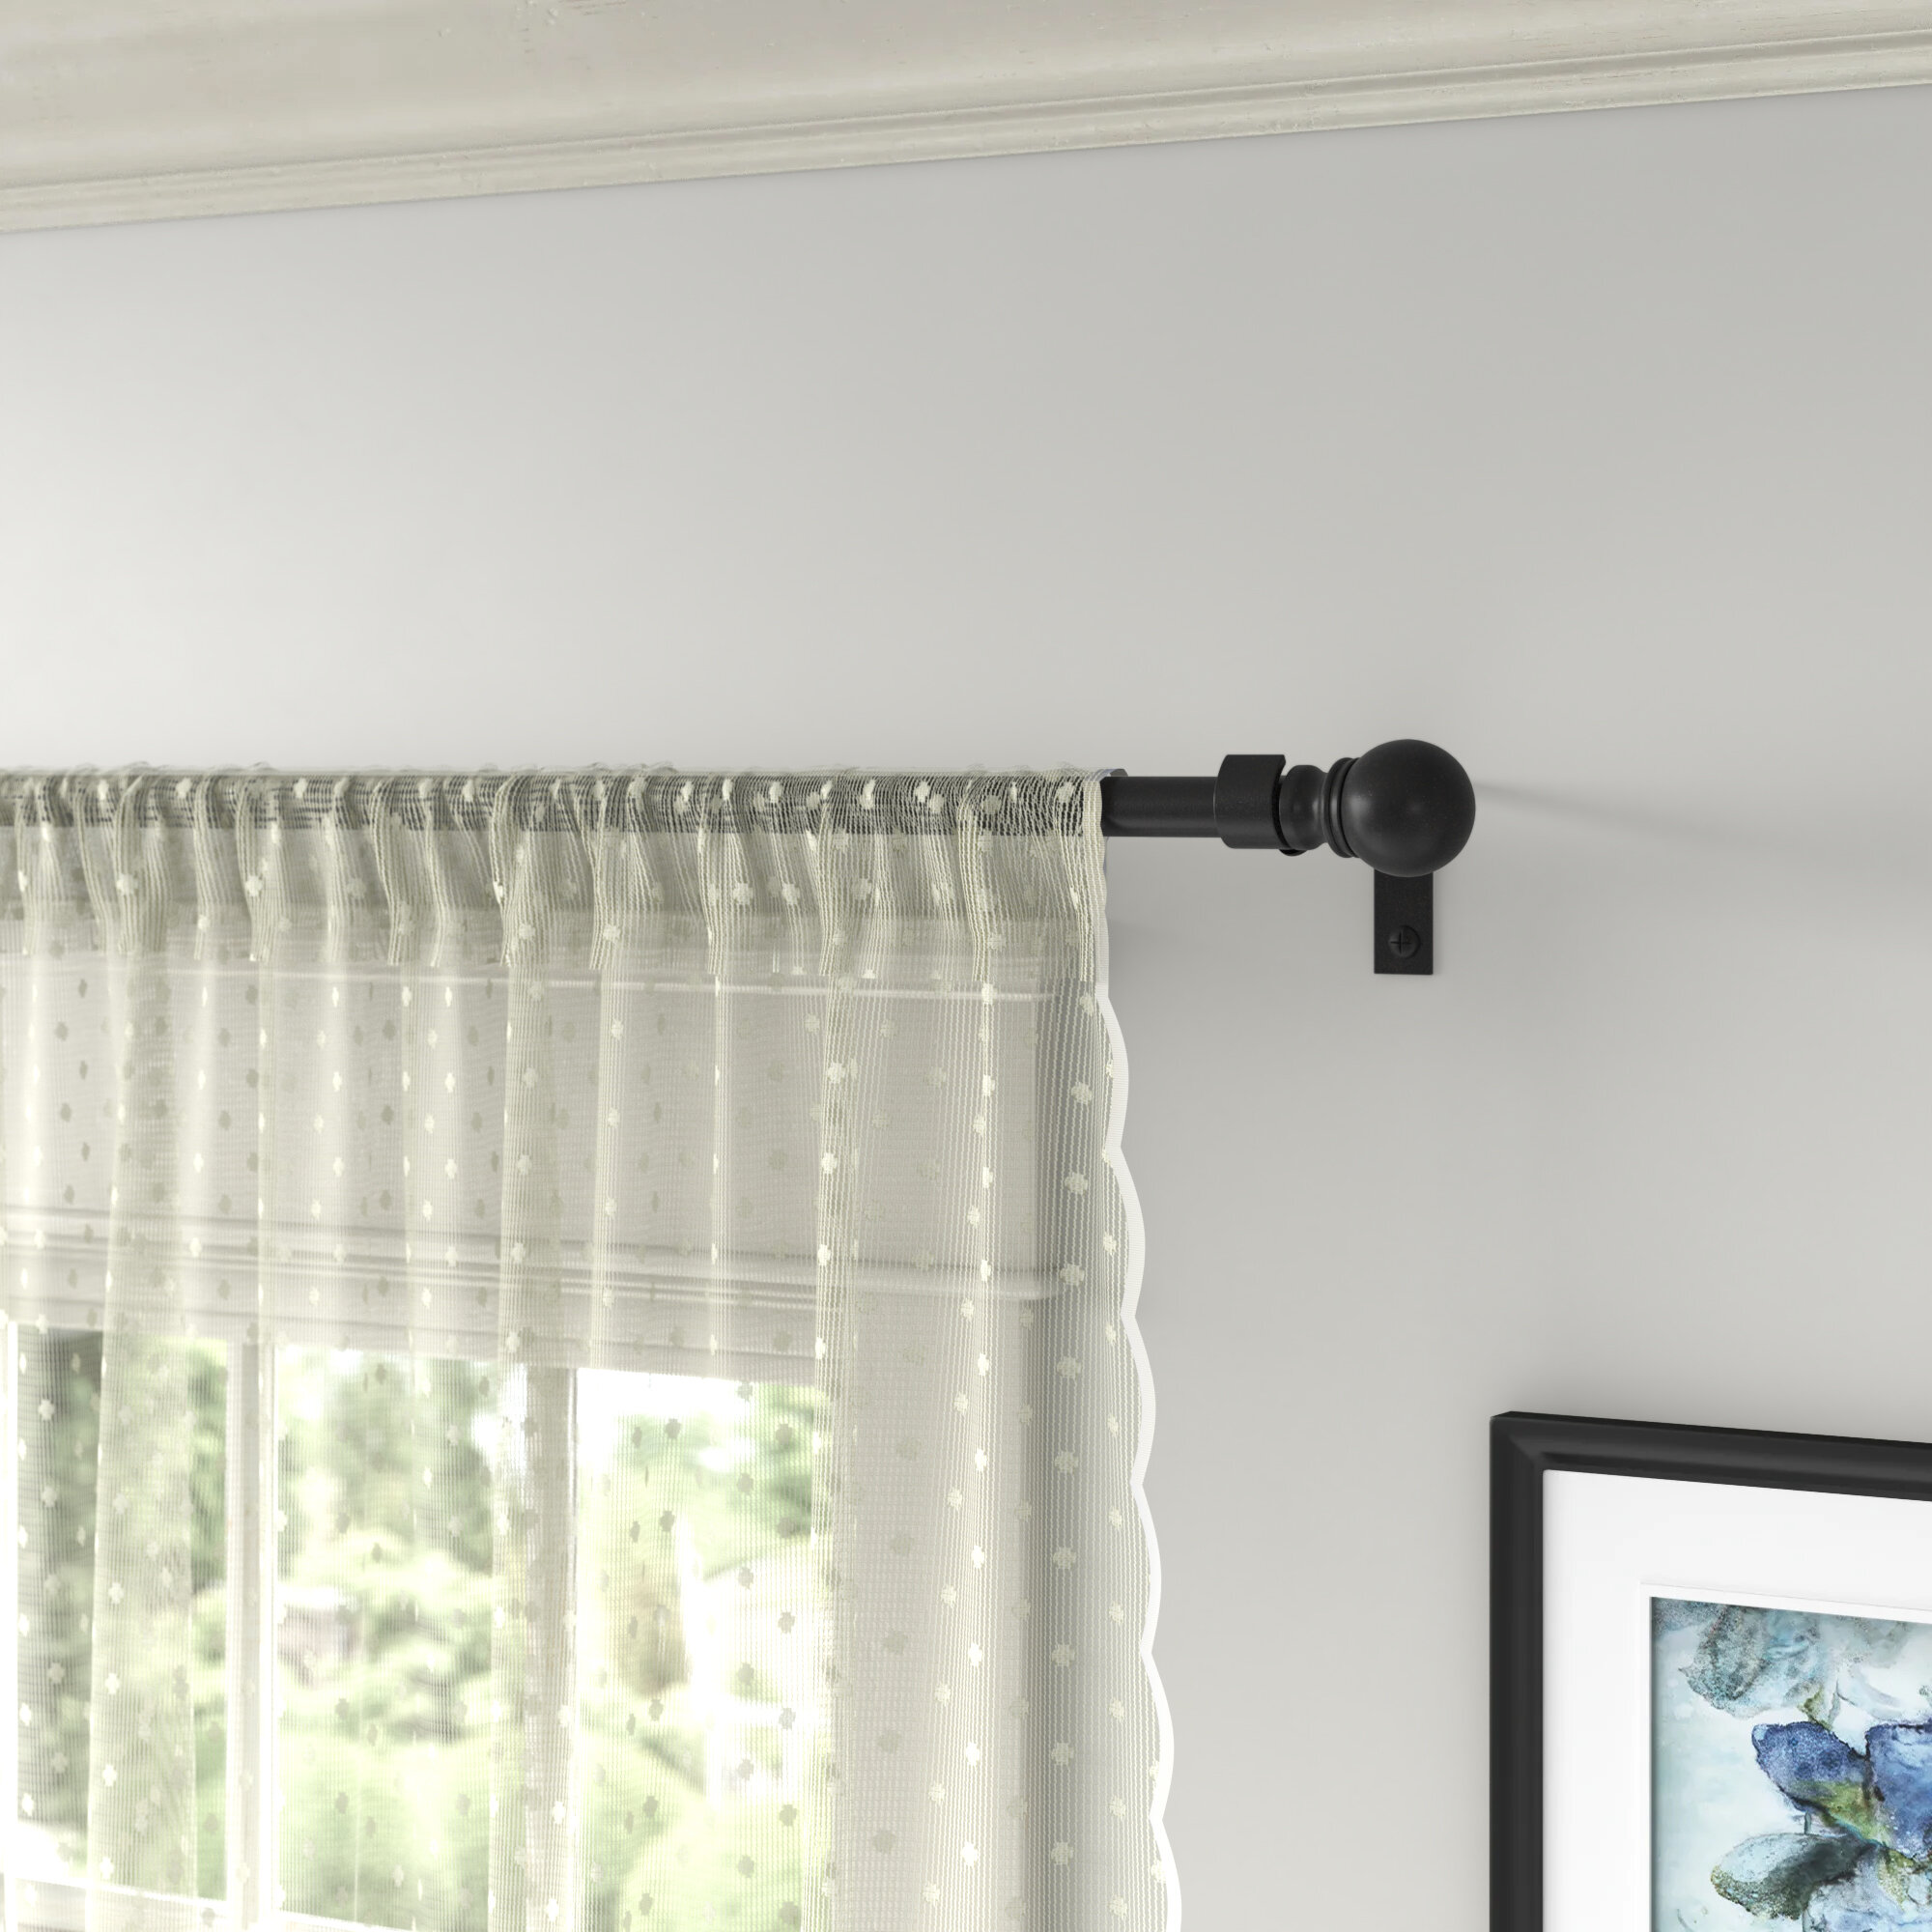 Metal VALANCE Rail Valance curtain track complete with hooks 4 sizes 